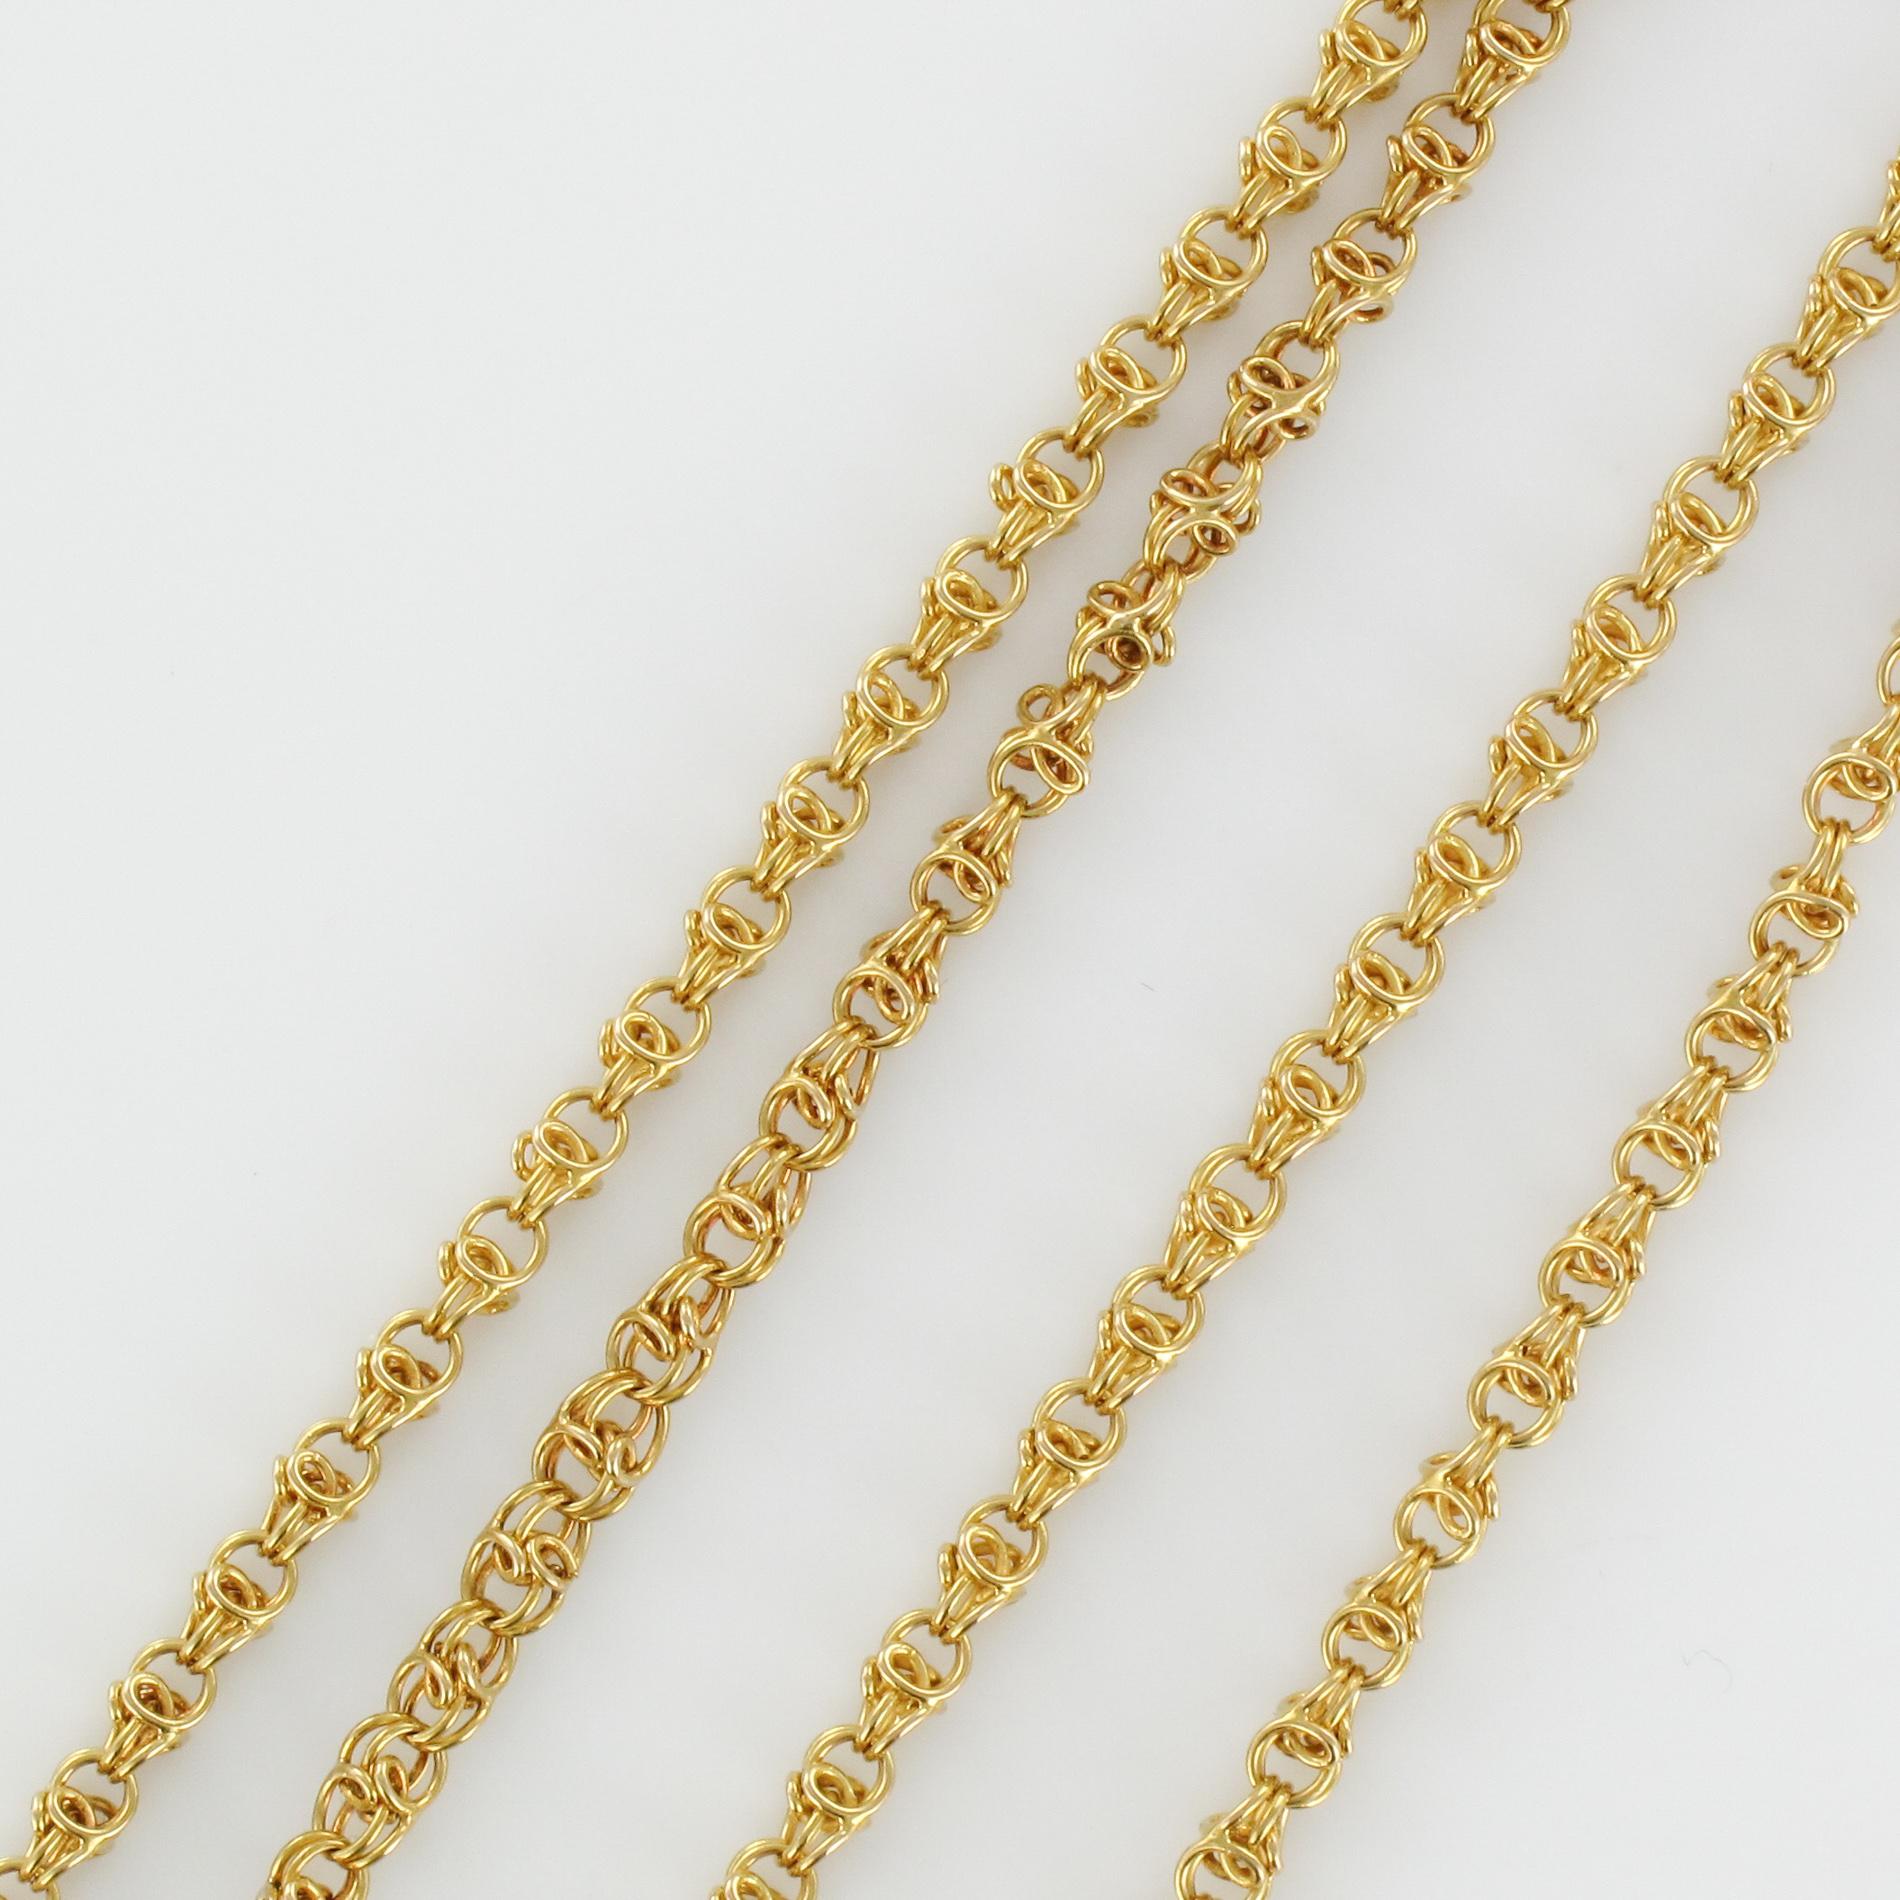 Napoleon 3 French 18 Karat Yellow Gold Long Chain Necklace 6